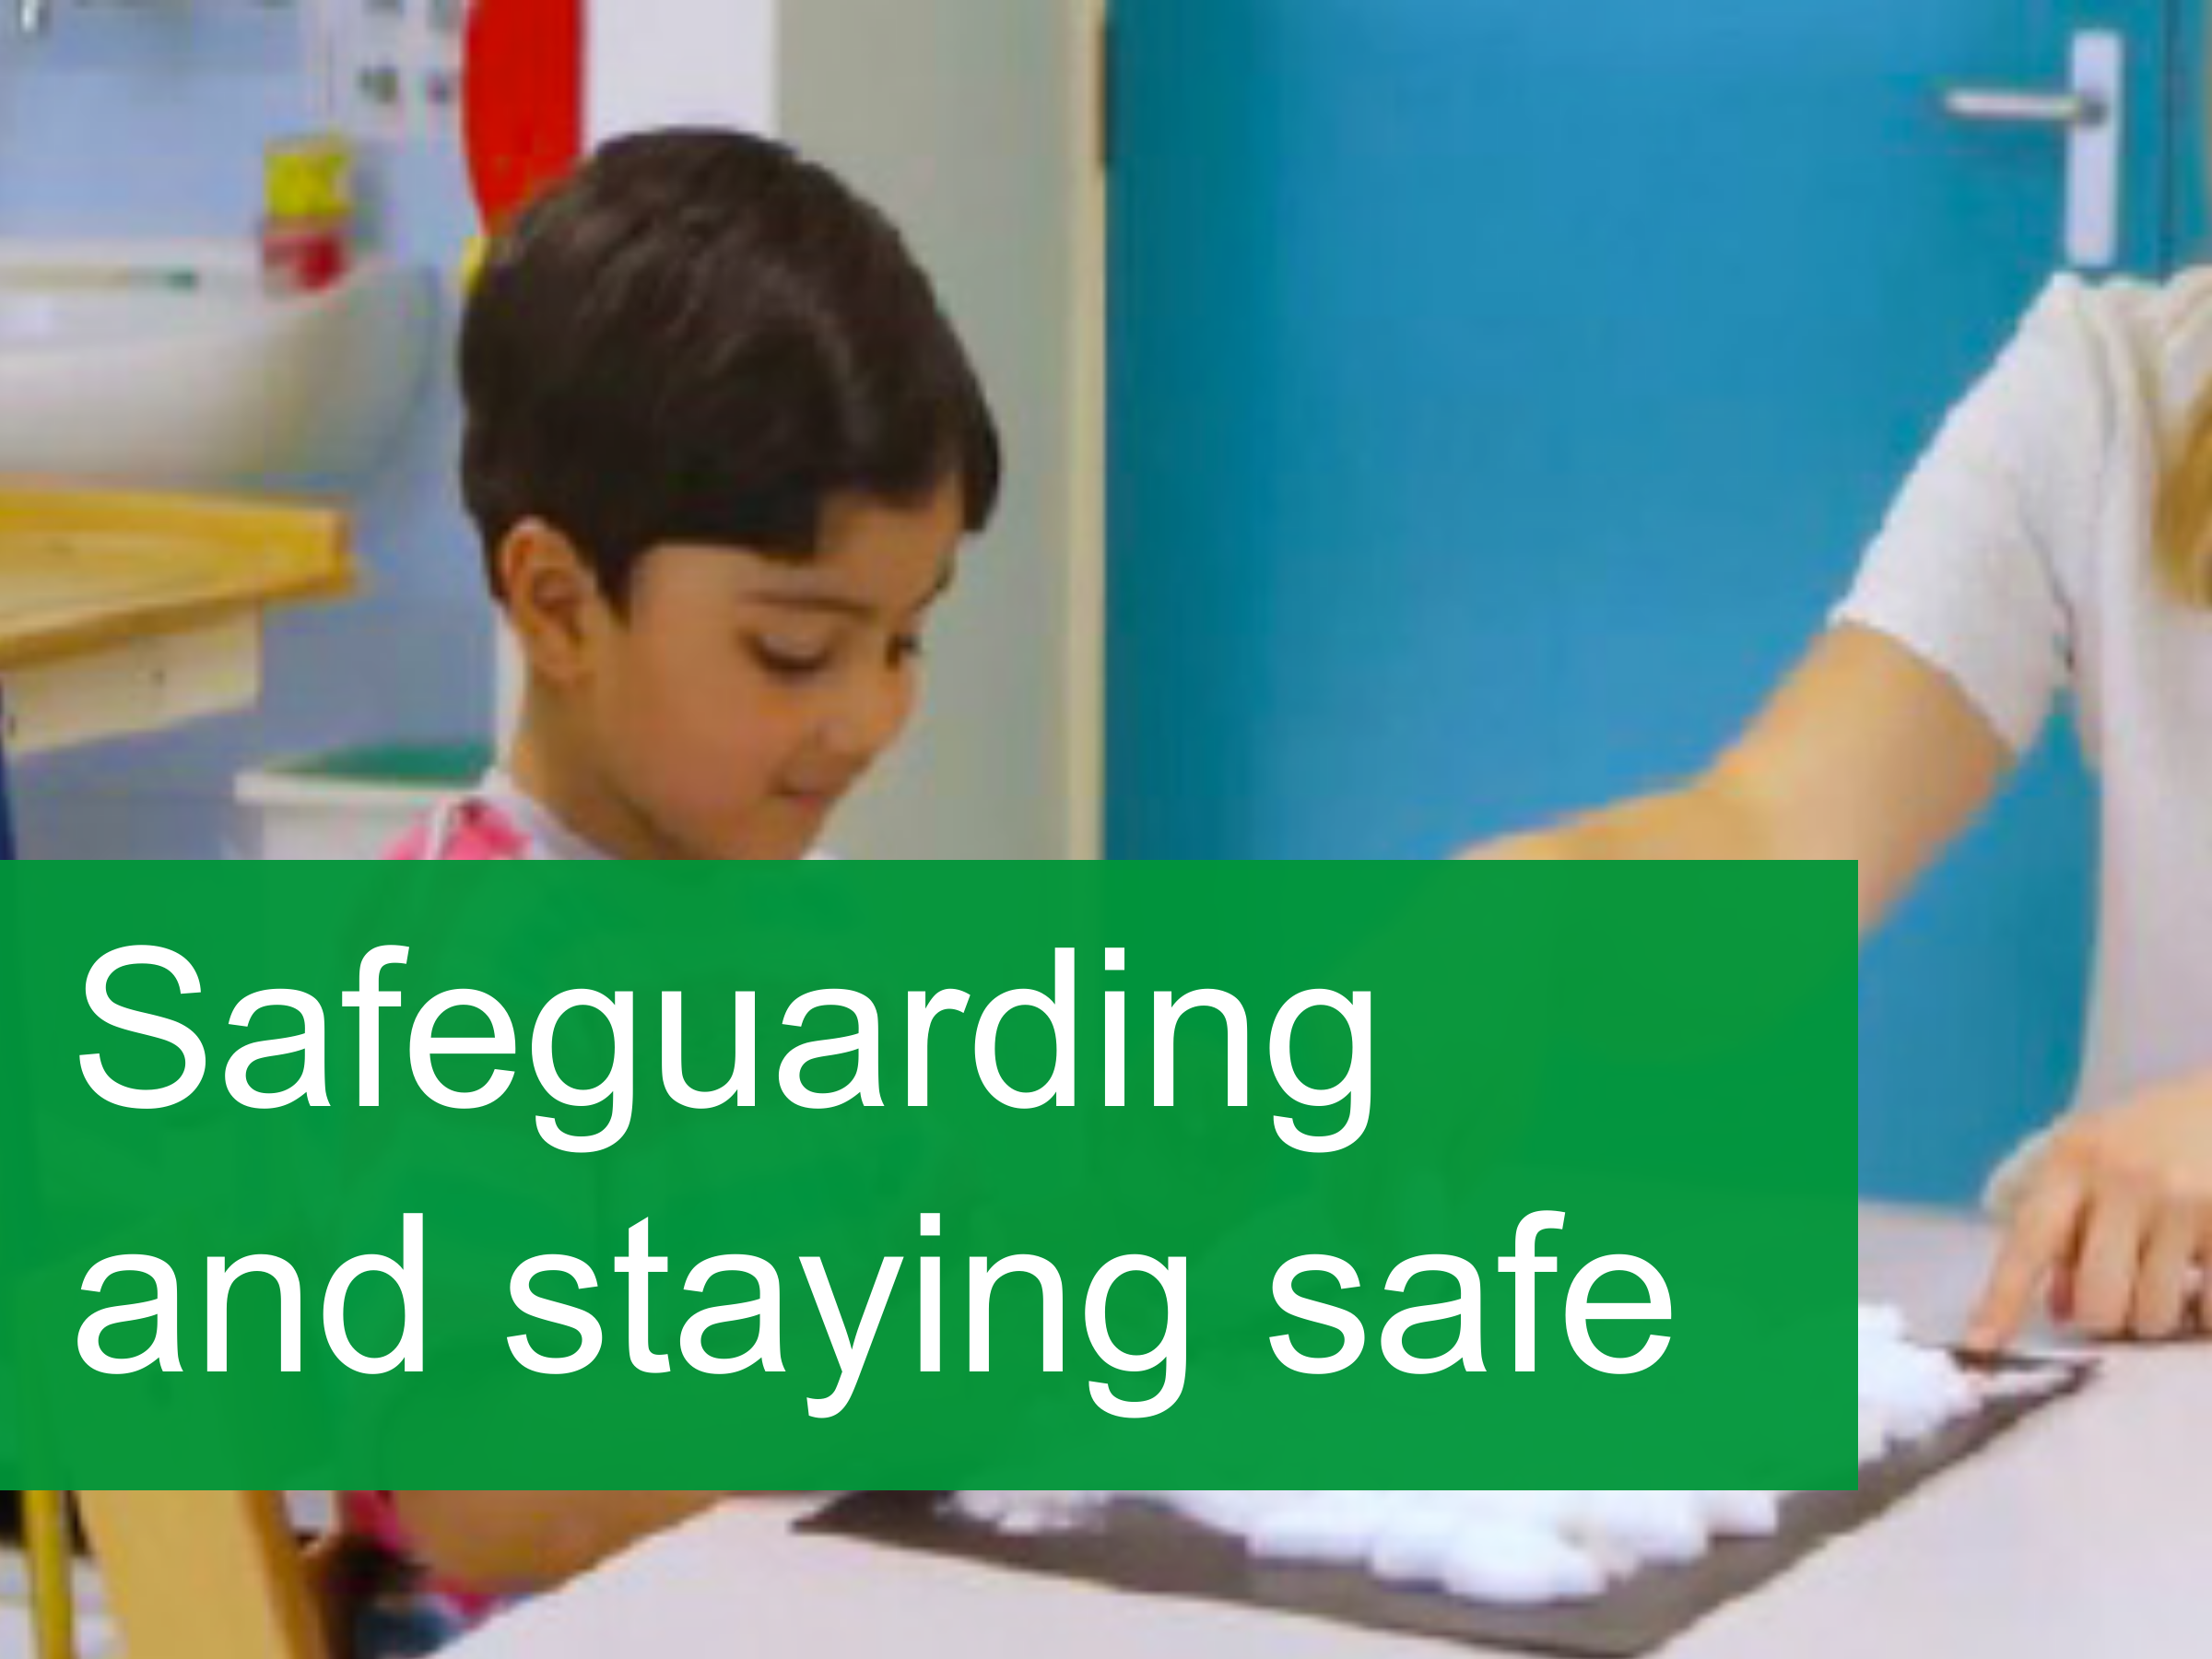 Safeguarding and staying safe